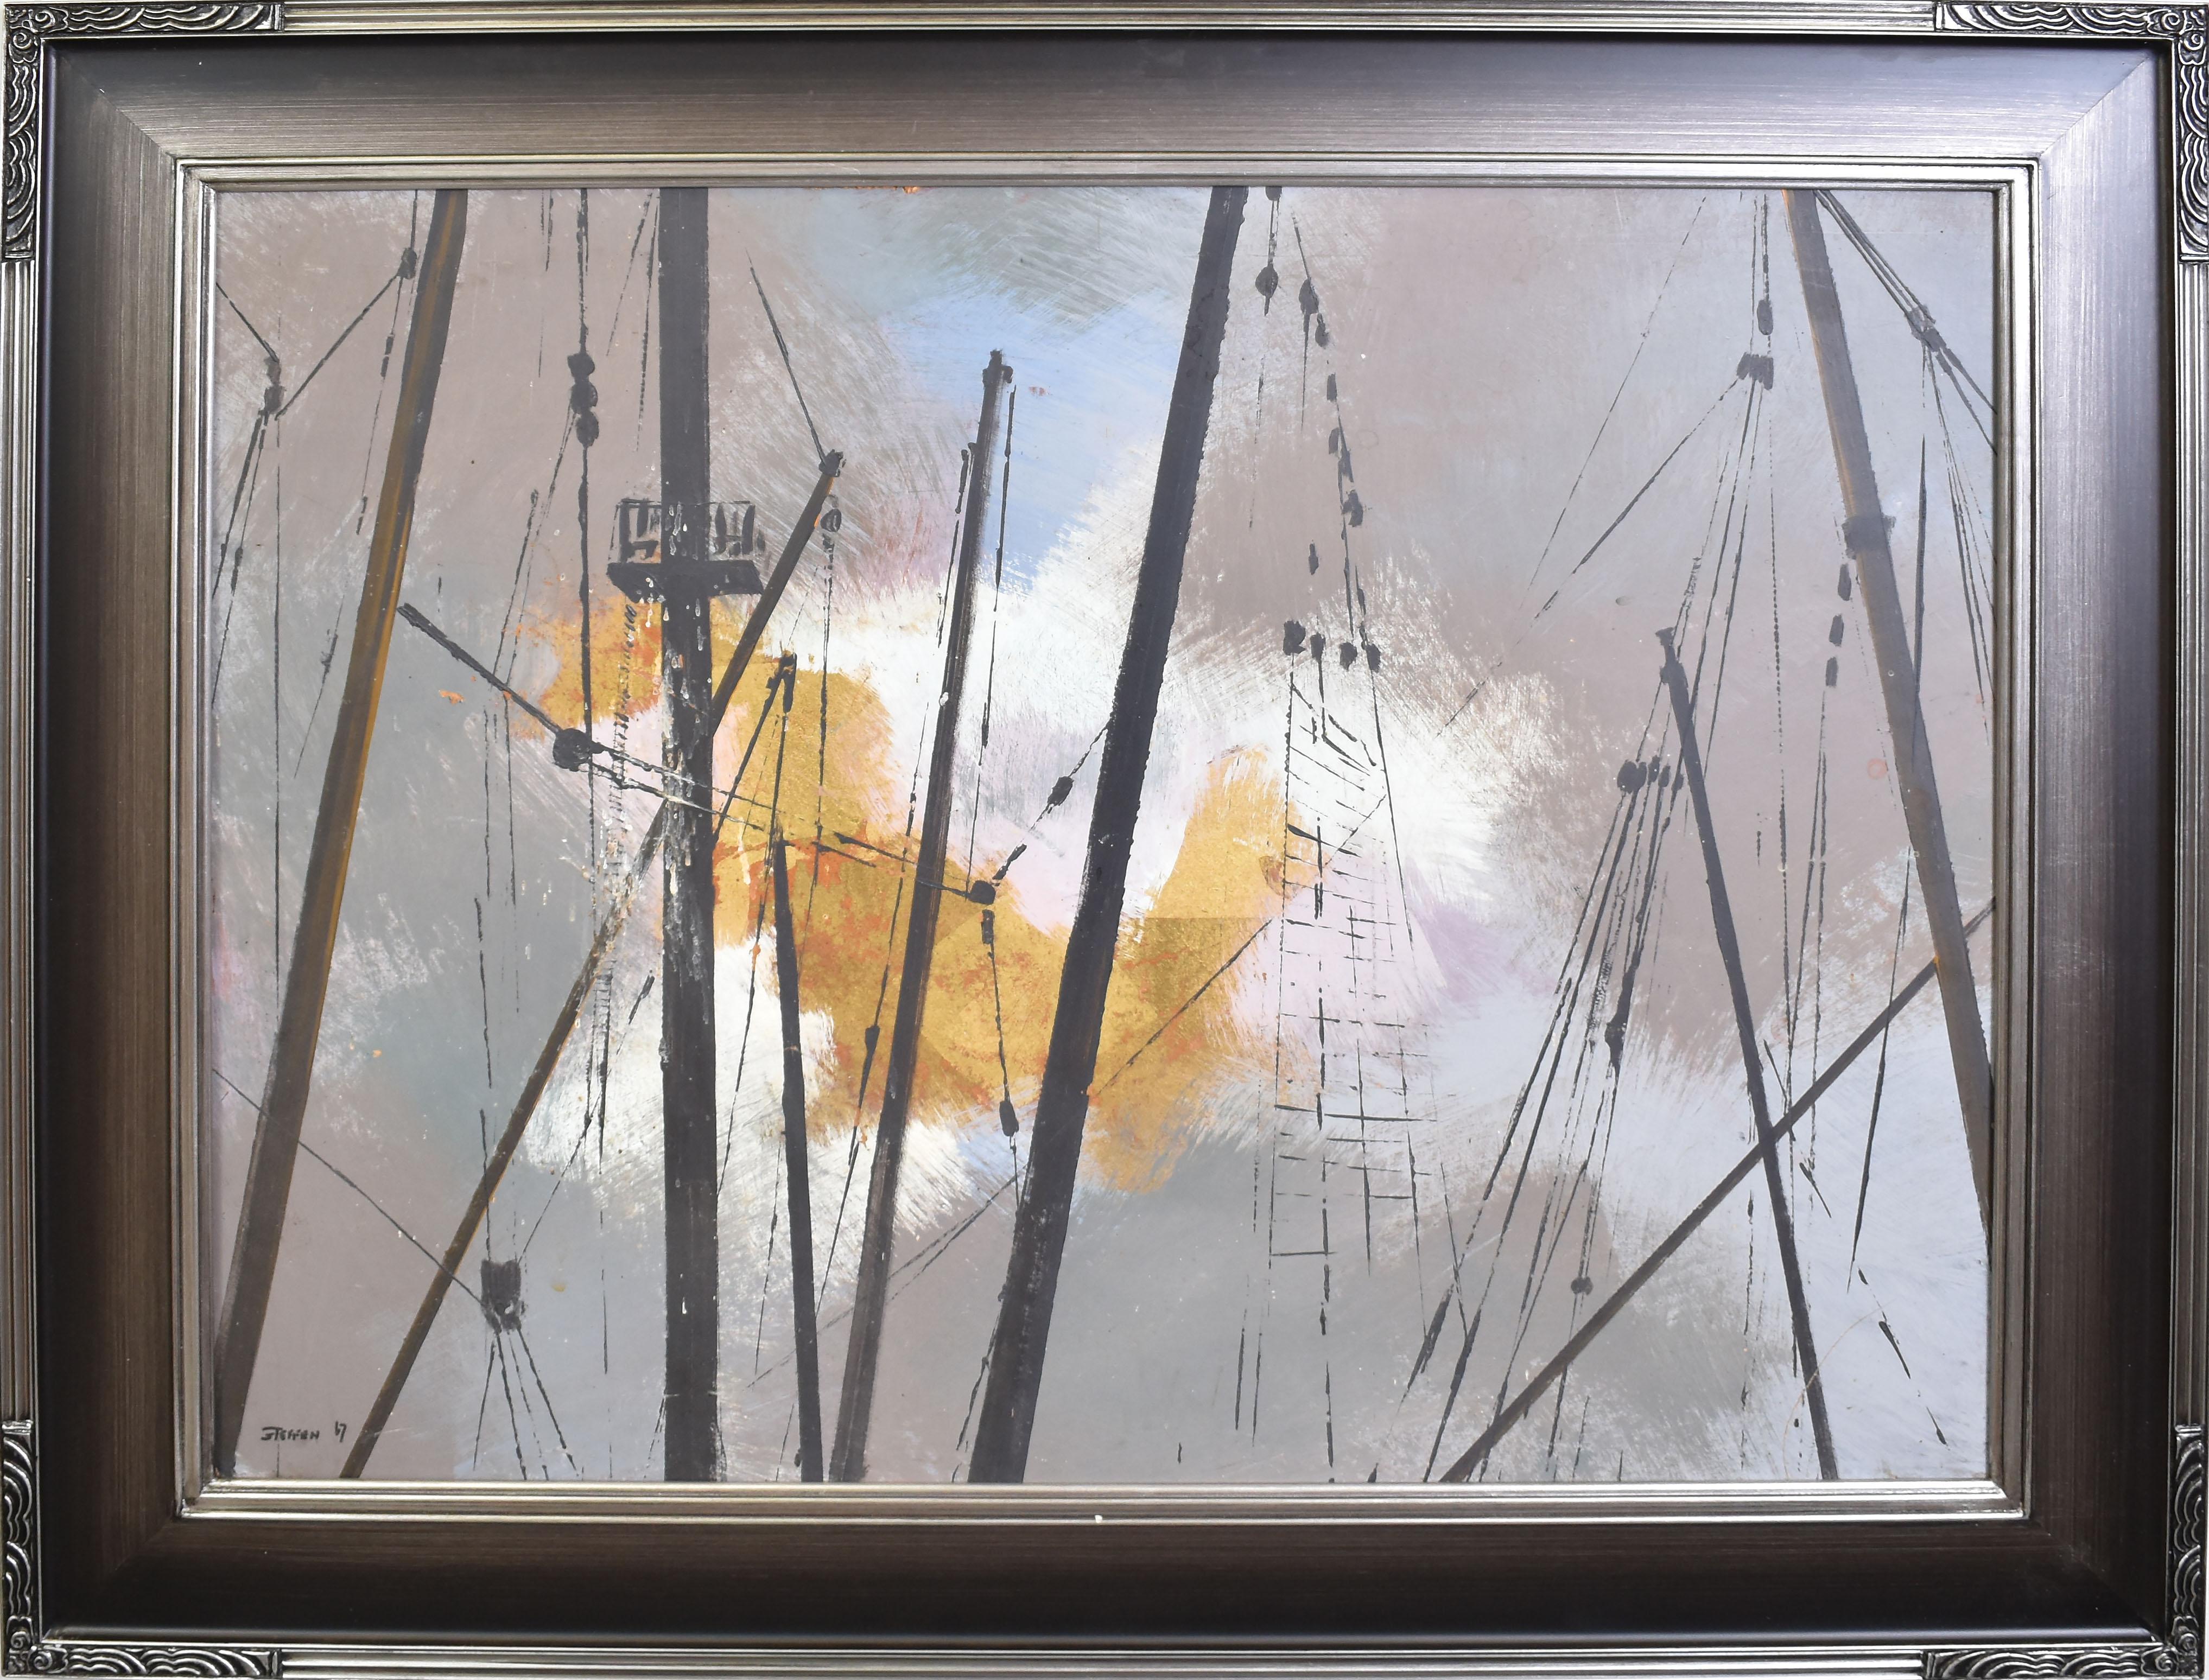 Vintage Abstracted Sky Study Oil Painting with Ship Masts by Steffen 1967 (Grau), Abstract Painting, von Unknown